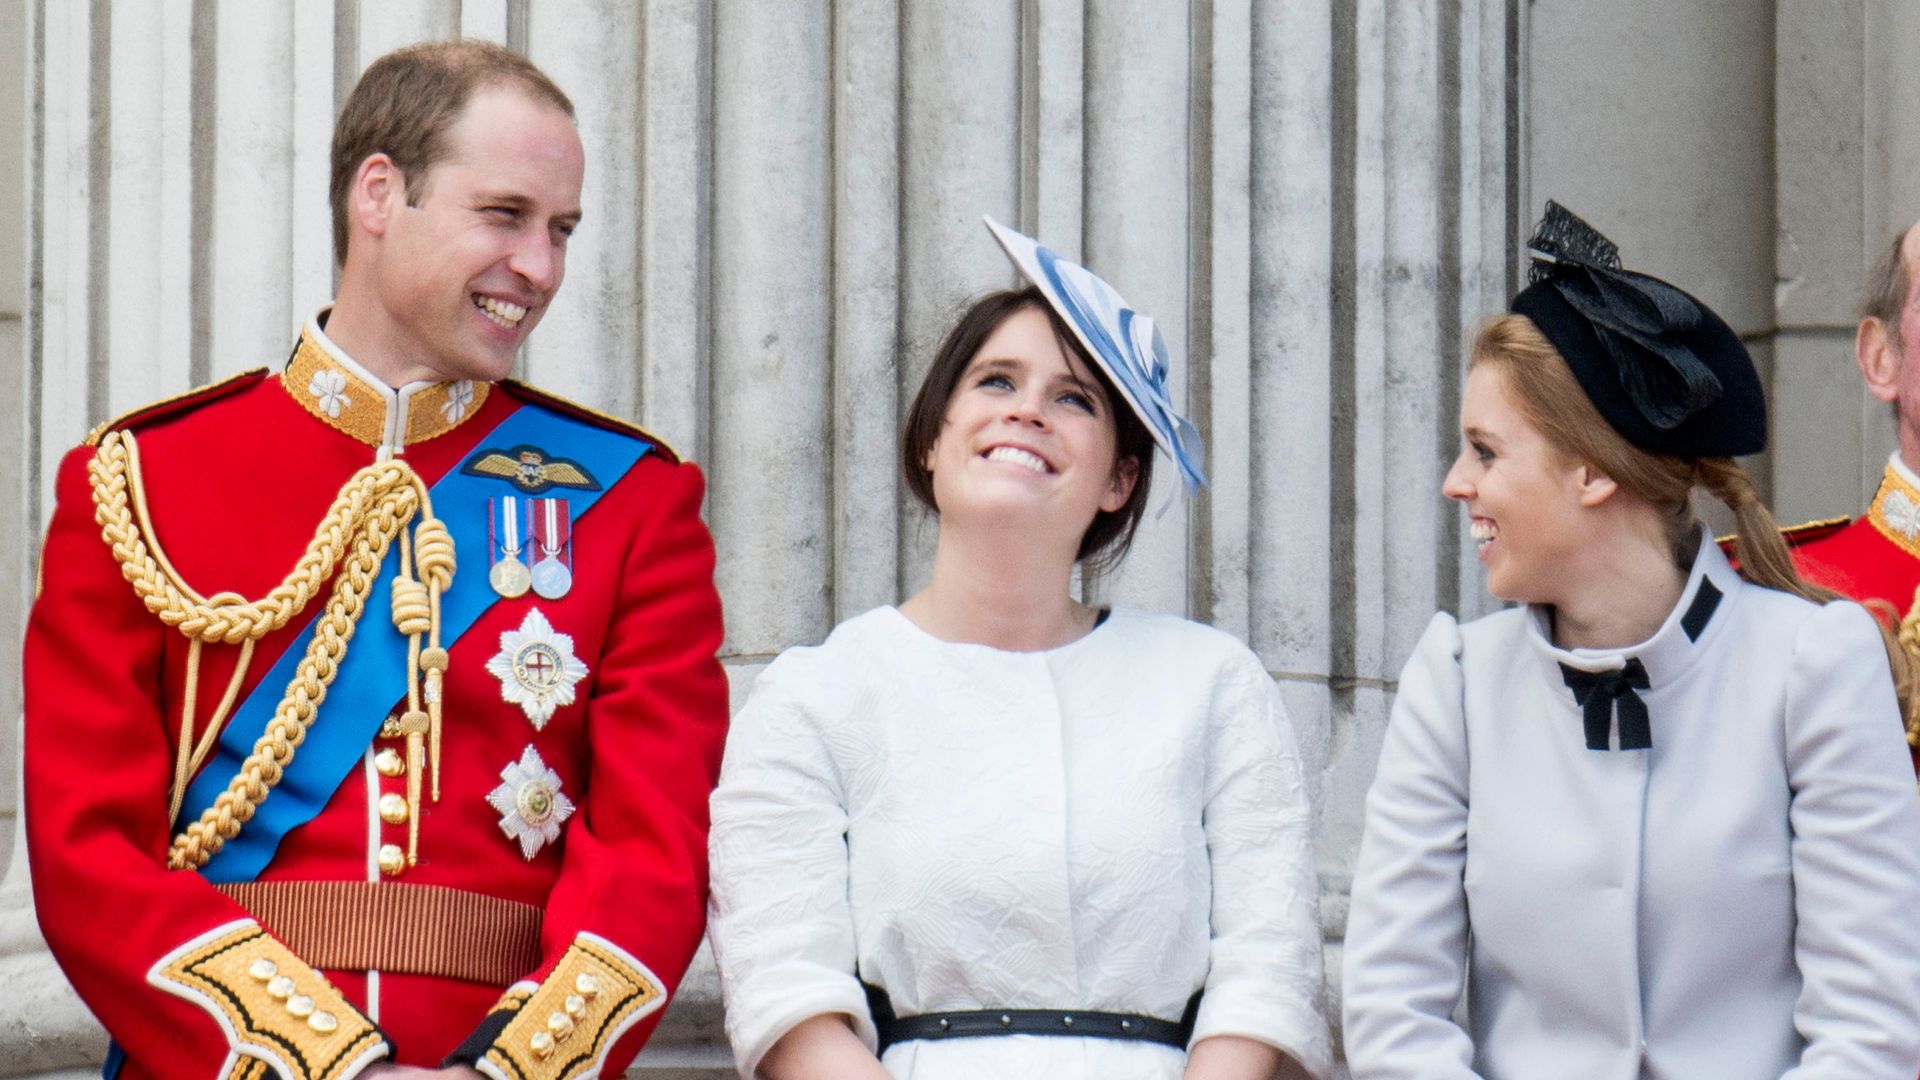 Prince William with Princess Eugenie and Princess Beatrice during the annual Trooping The Colour ceremony at Buckingham Palace on June 15, 2013 in London